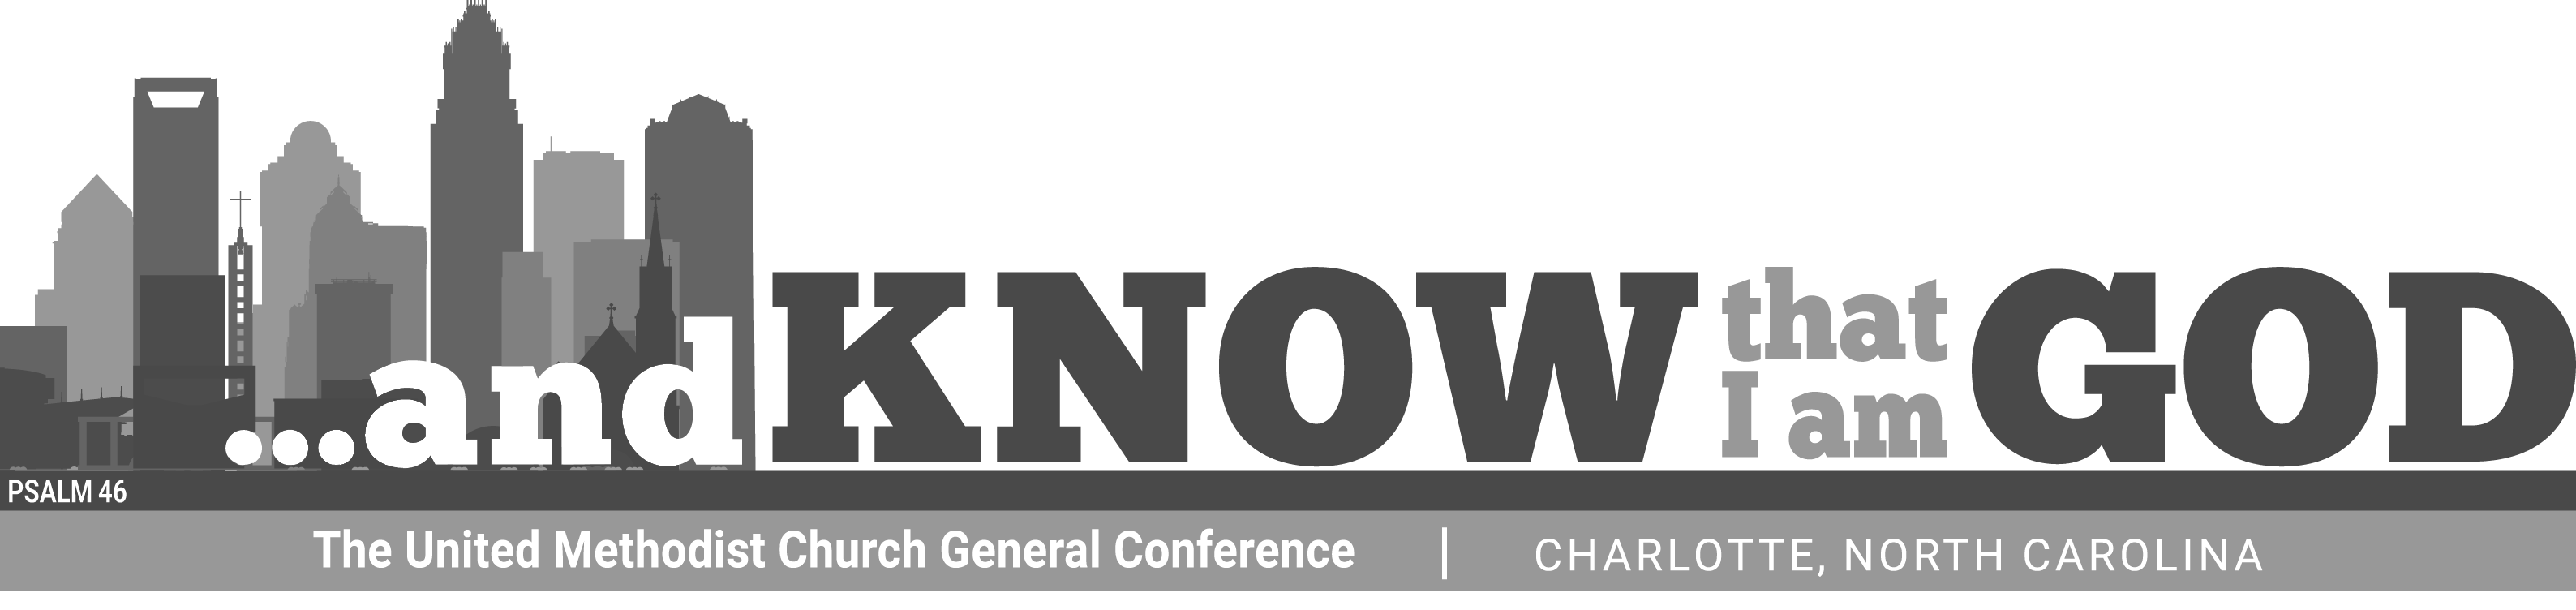 The updated General Conference logo was revealed on May 31, 2023. The original theme “… and know that I am God,” based on an excerpt from Psalm 46:10, moves forward now paired with a Charlotte skyline image representative of the new host city. The image was designed by the commission in partnership with United Methodist Communications. Horizontal, black and white version of the updated GC logo.